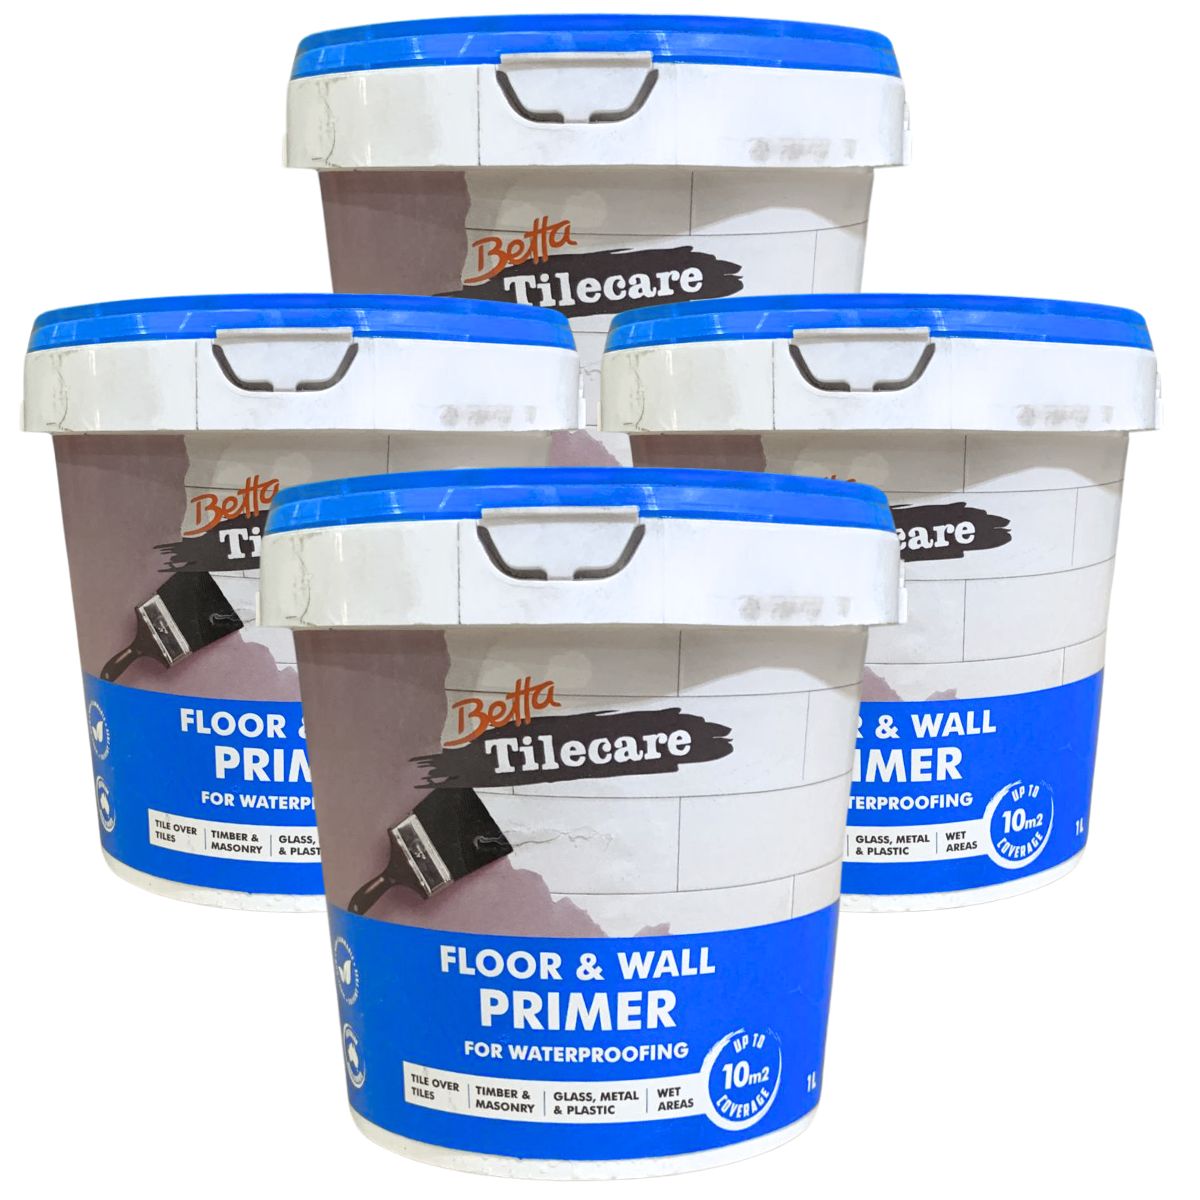 Betta Tilecare Floor & Wall Primer for Waterproofing | 1 Litre (4 Buckets) - South East Clearance Centre